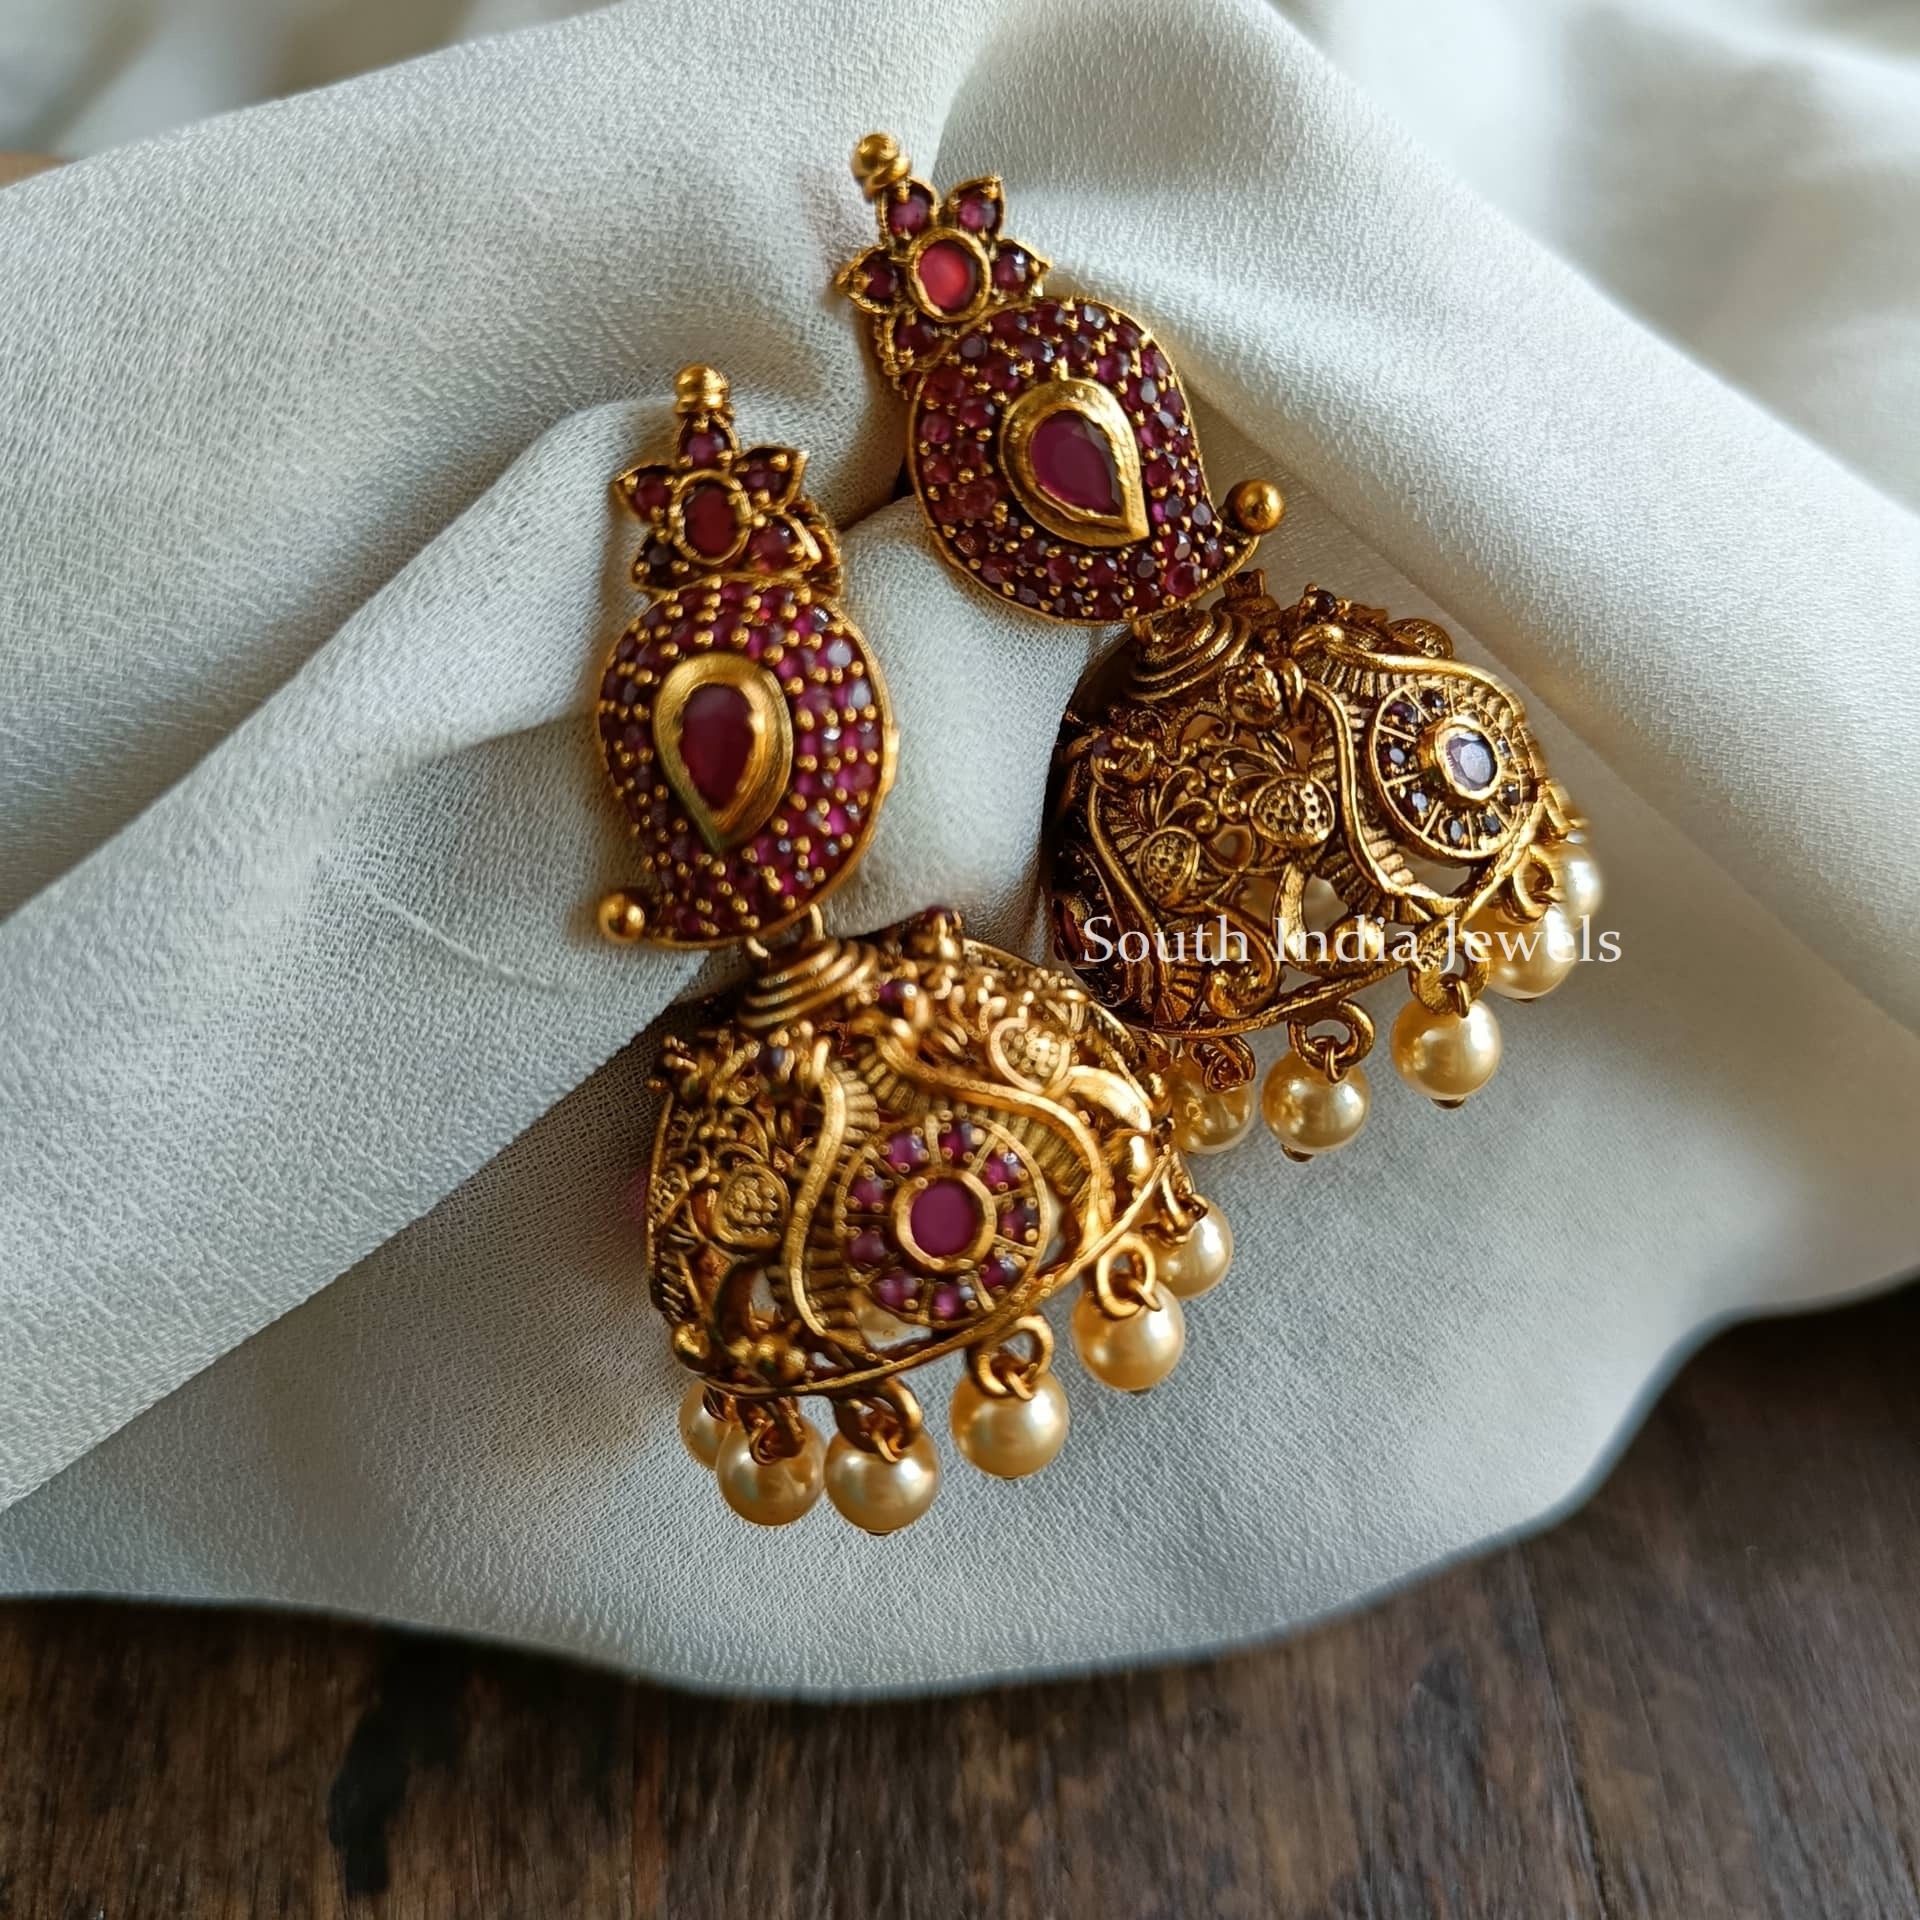 Buy South Indian Mango Design Antique Temple Gold Earrings